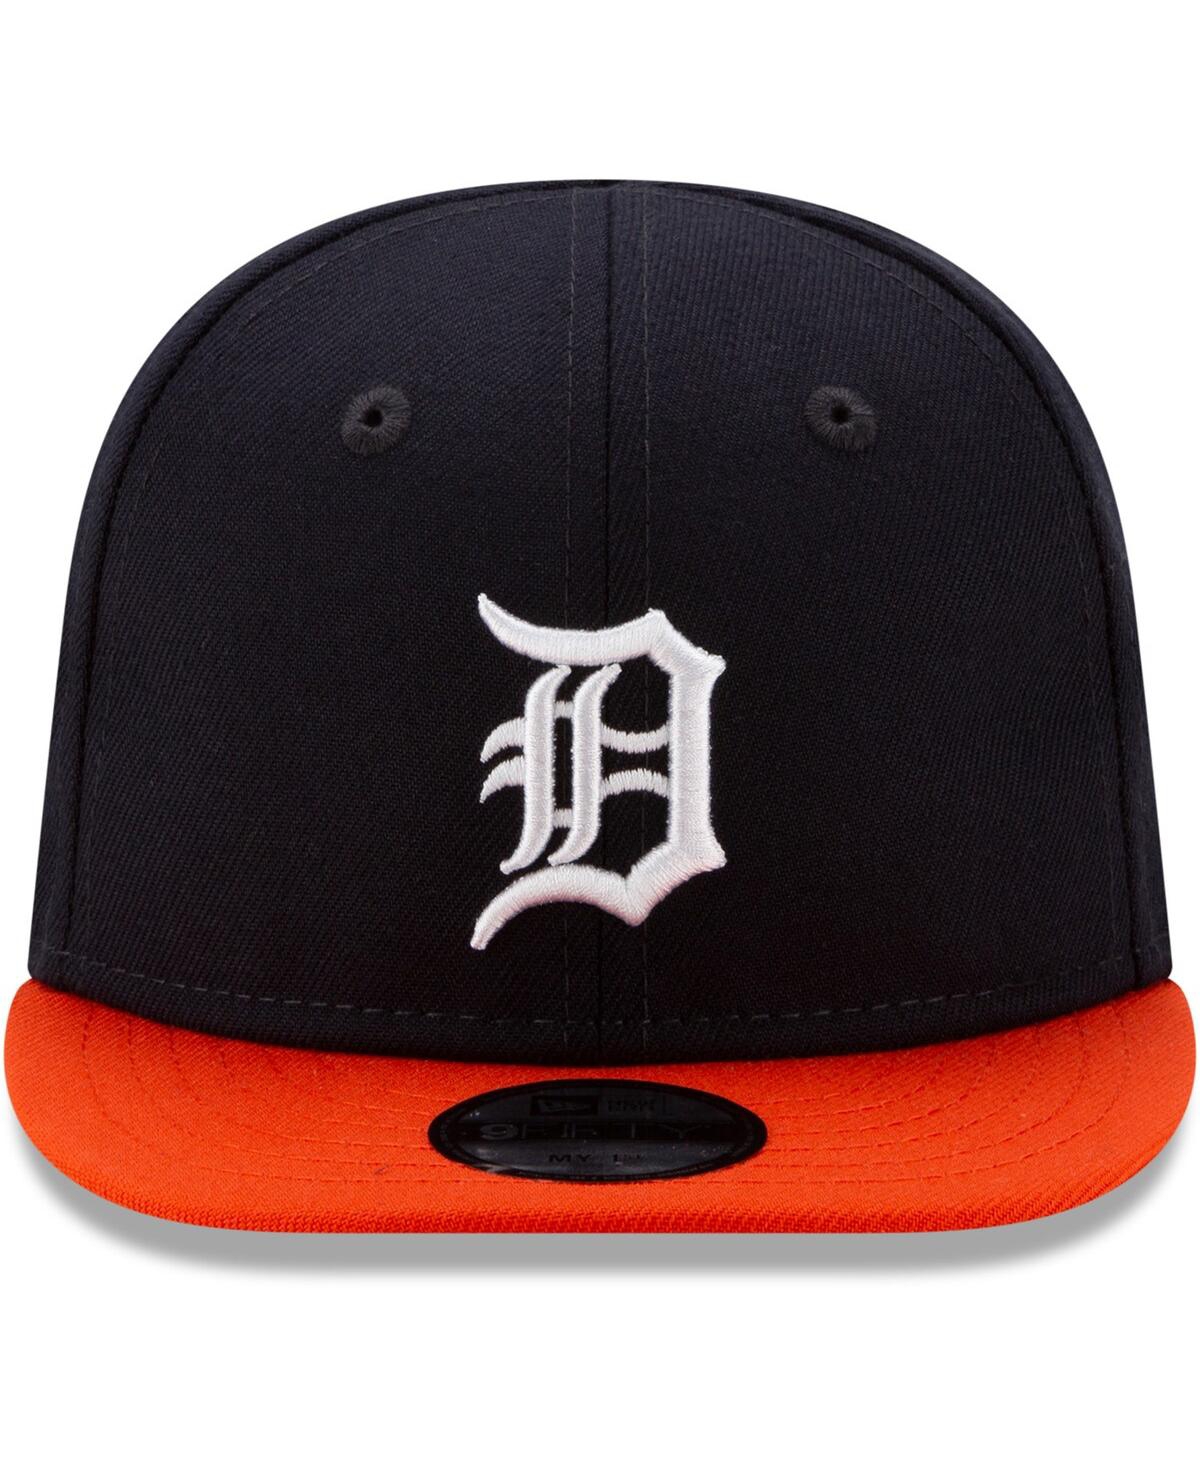 Shop New Era Infant Unisex  Navy Detroit Tigers My First 9fifty Hat